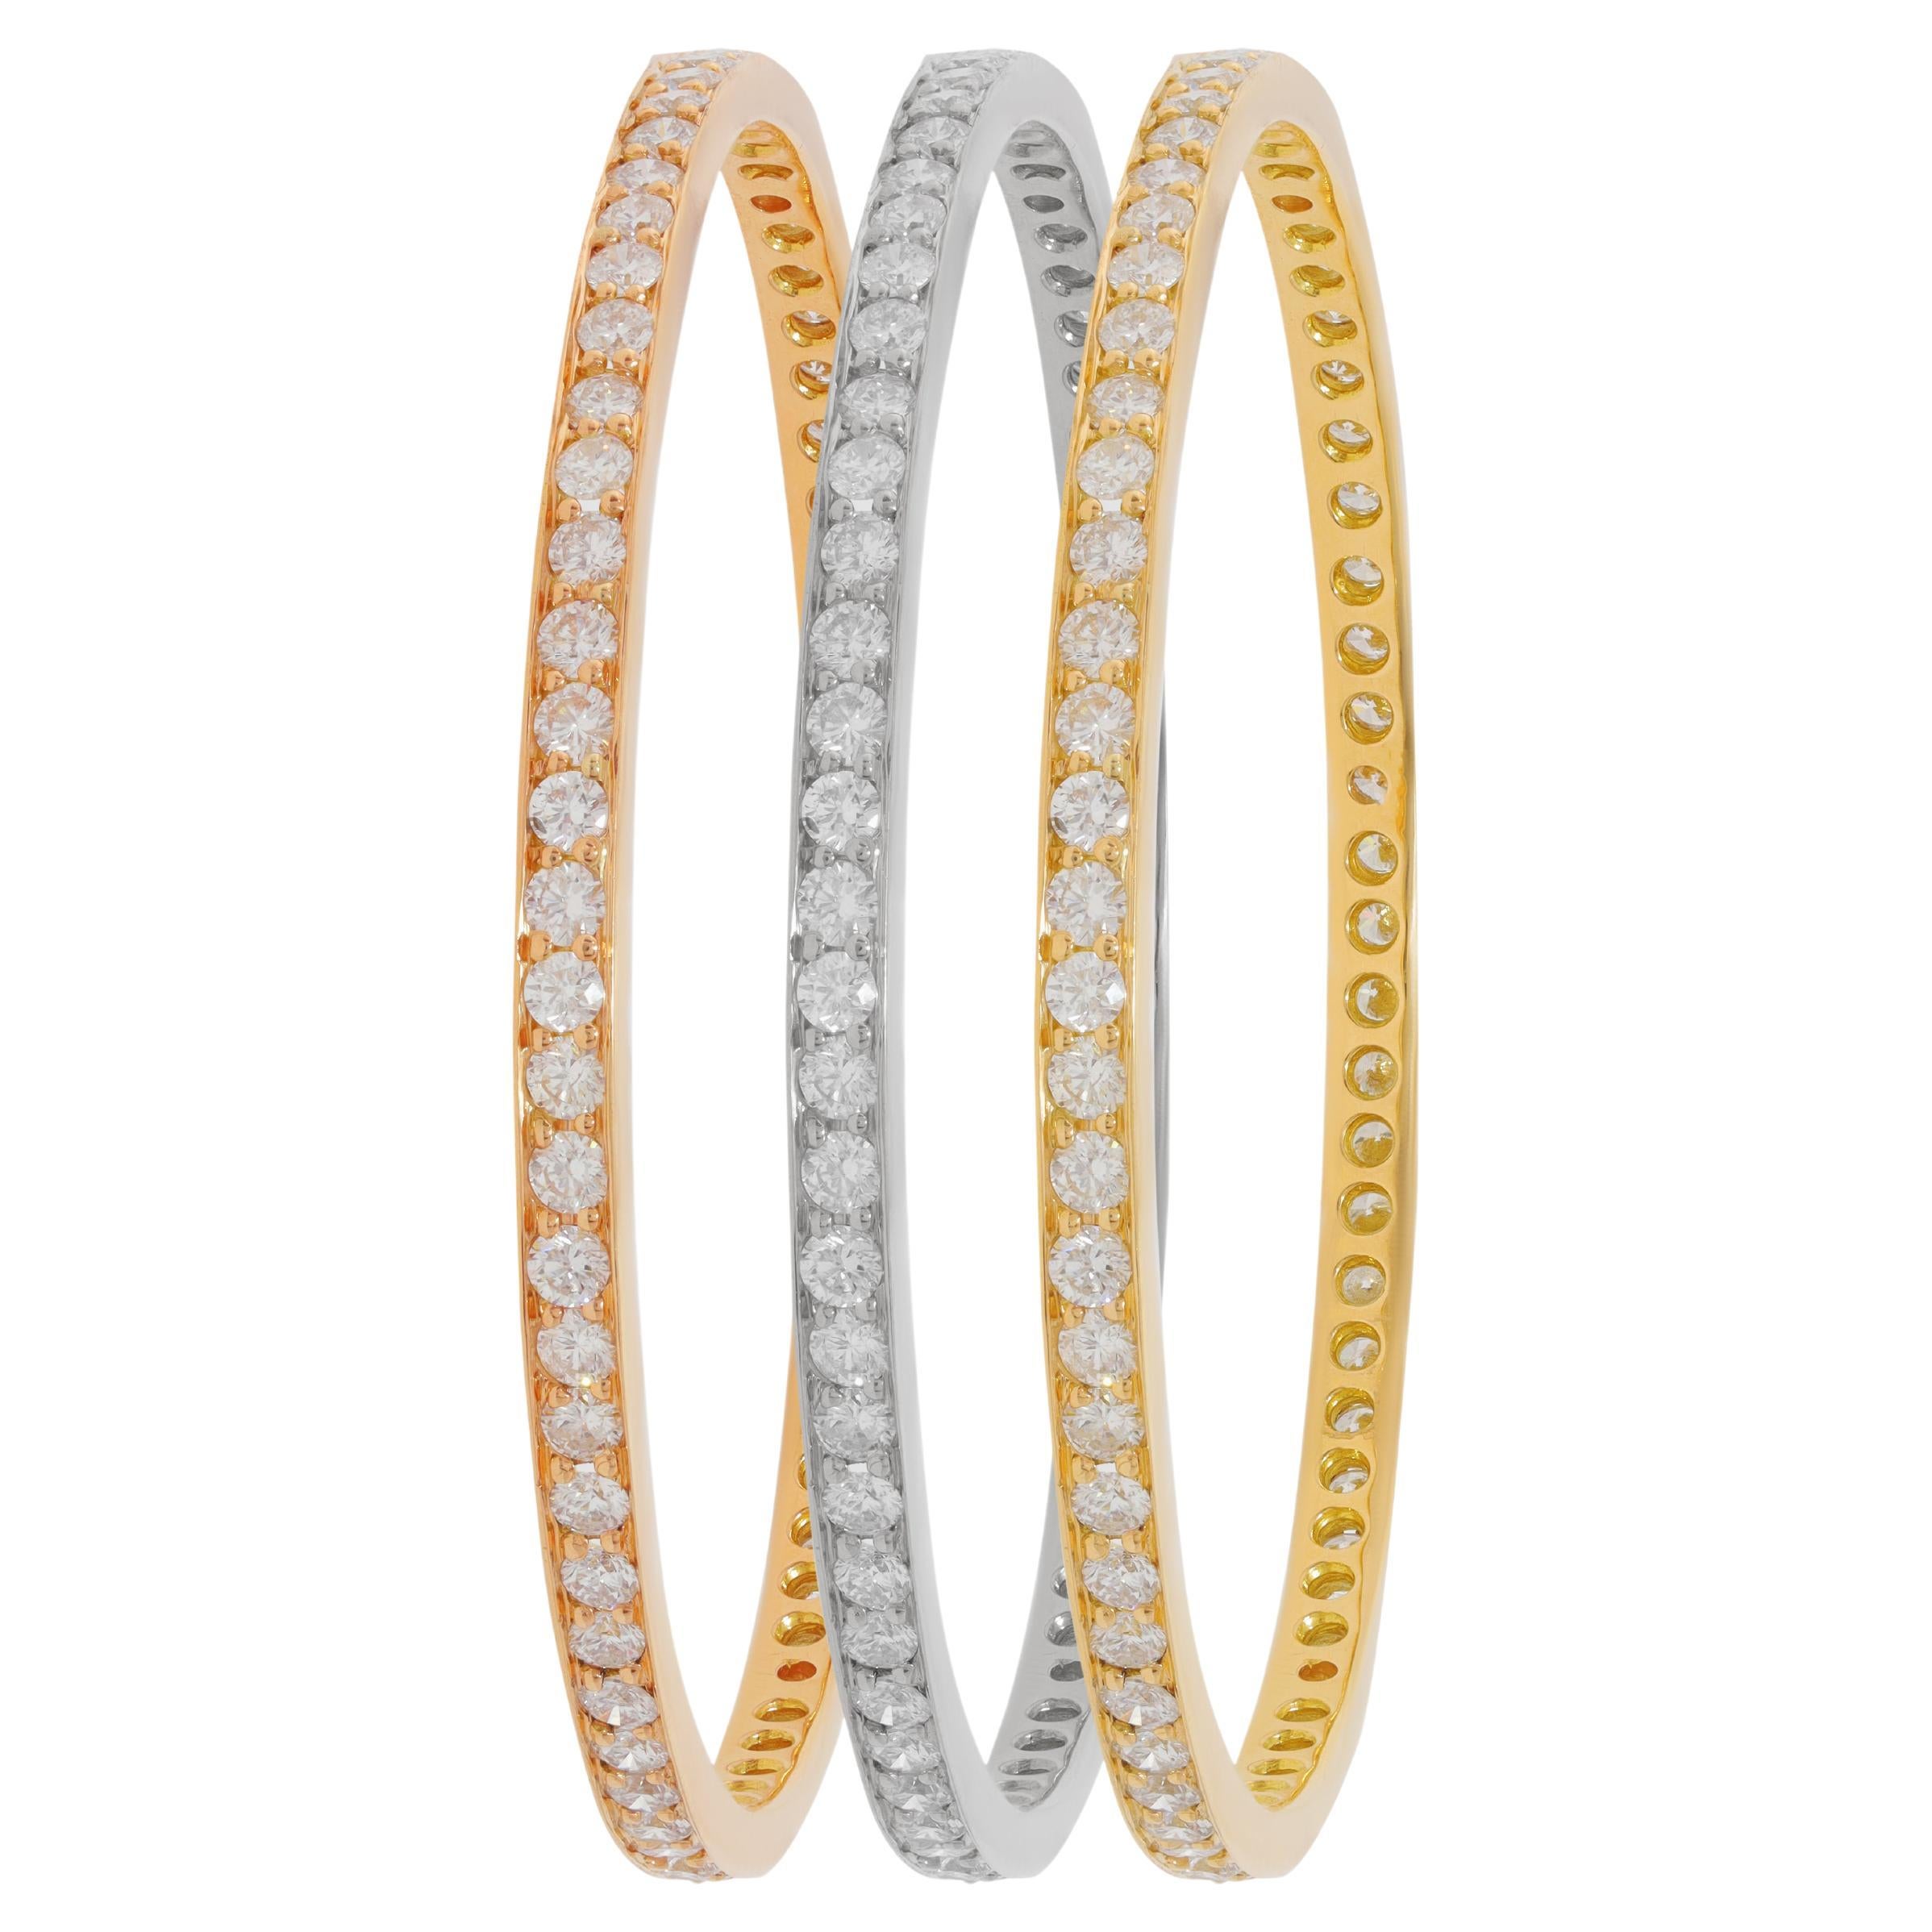 Diana M. Tri-color set of white, yellow, and rose gold bangles adorned with 23ct For Sale